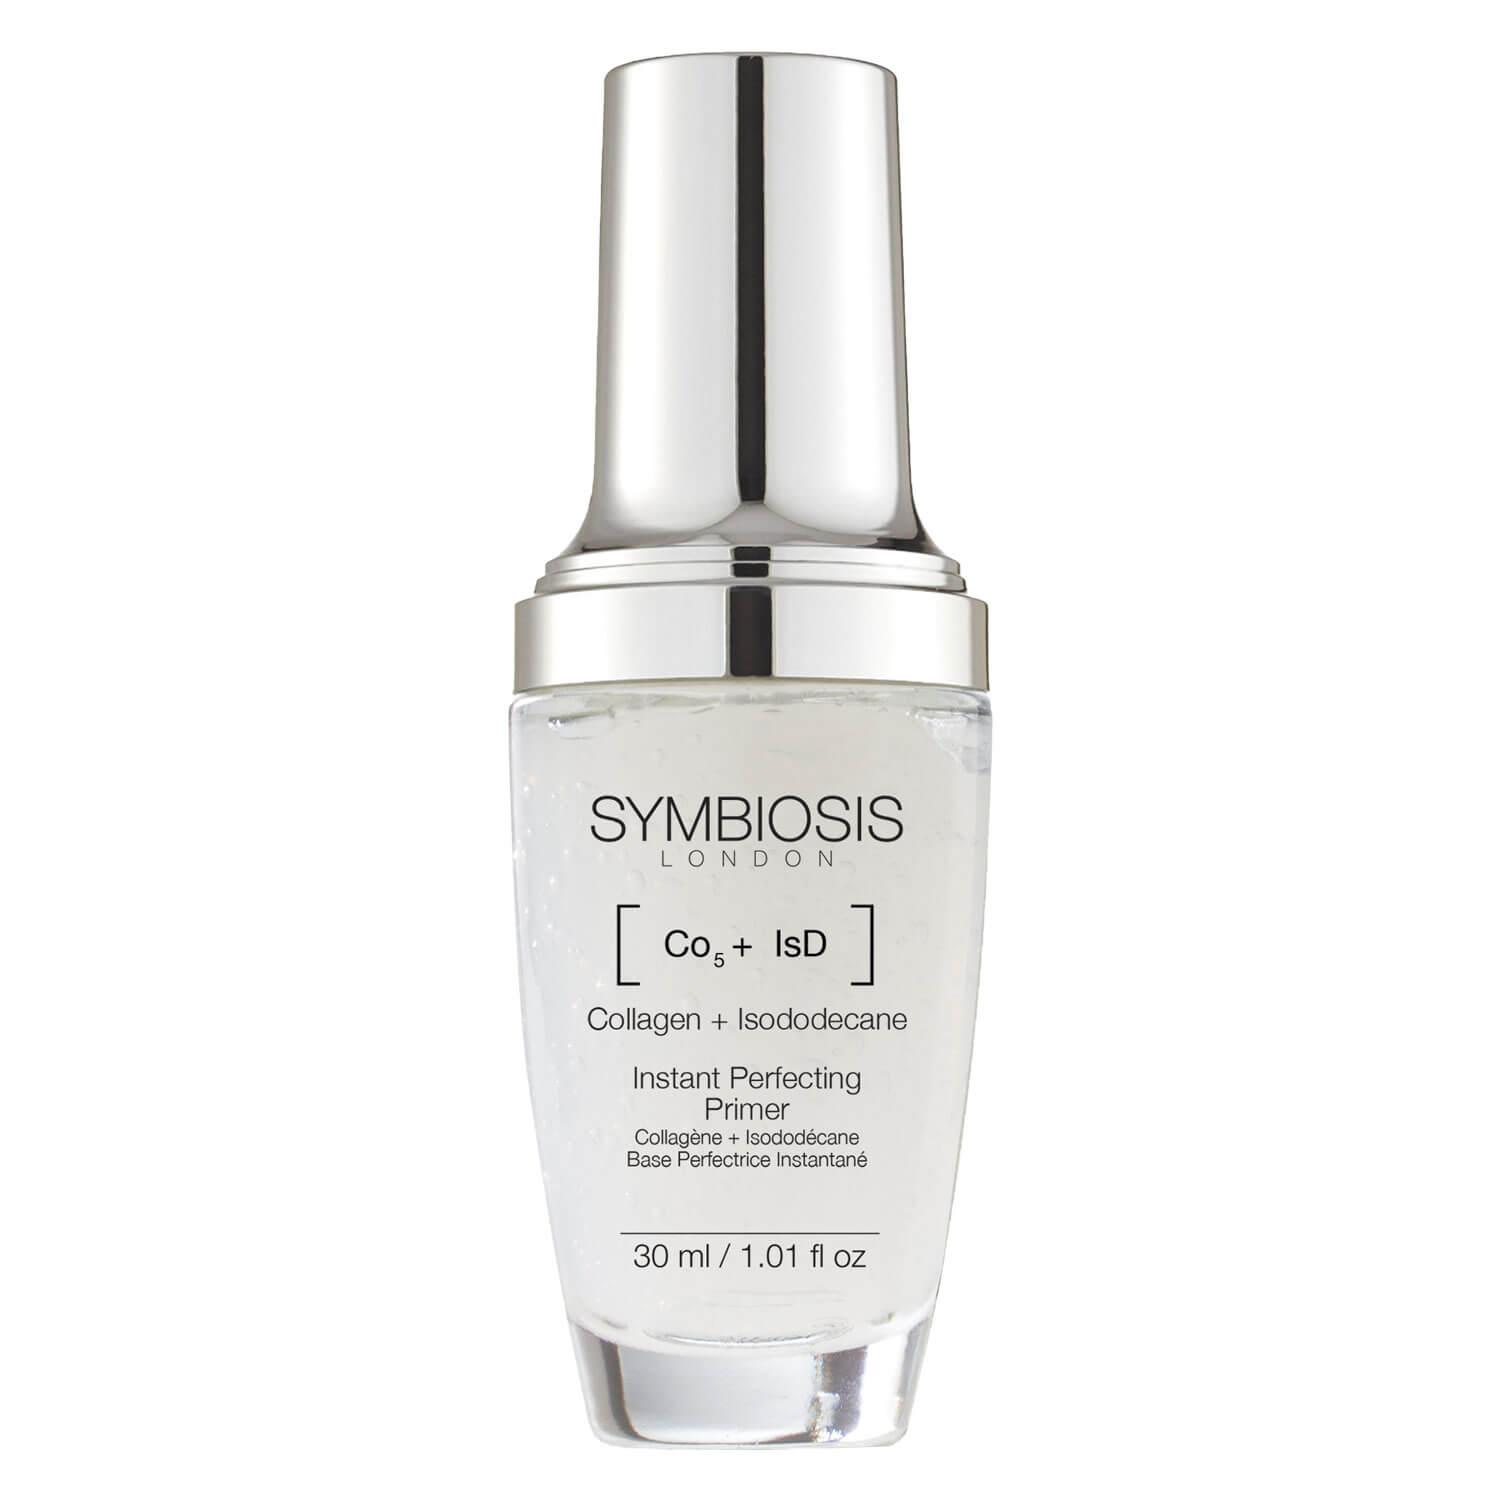 Symbiosis - [Collagen + Isododecane] Instant Perfecting Primer 